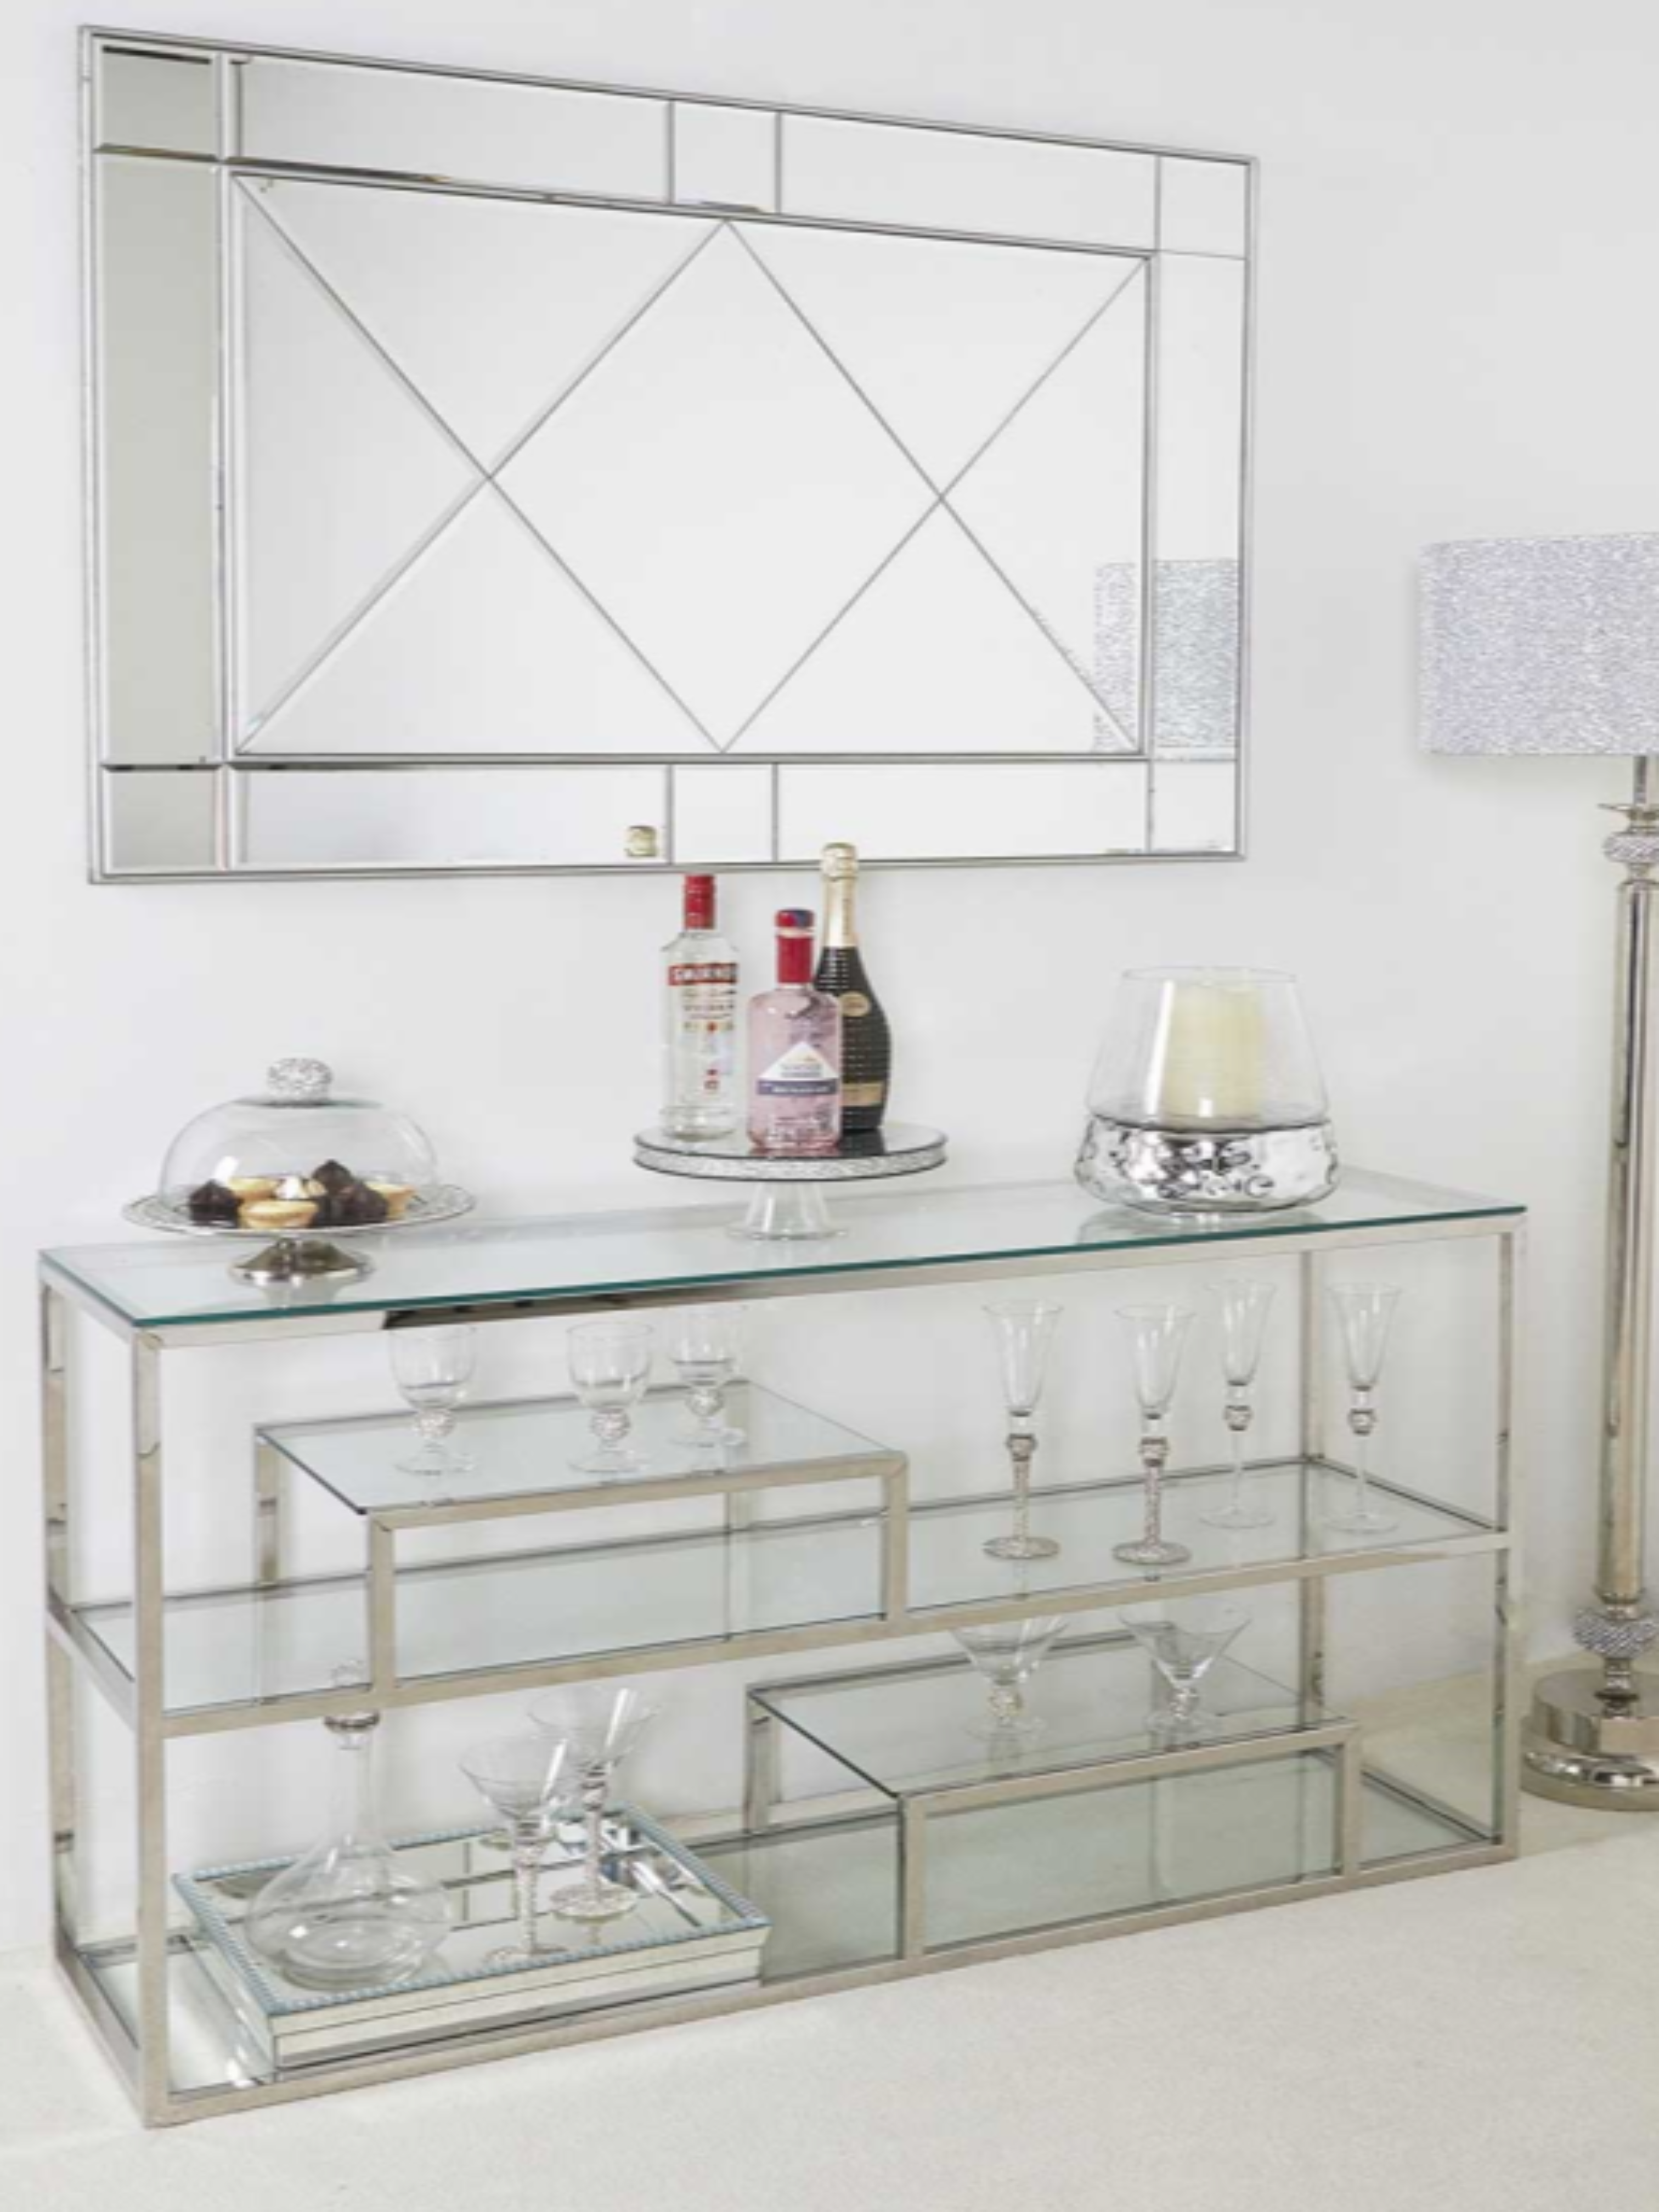 Chrome Steel and Clear Glass Tiered Console Table